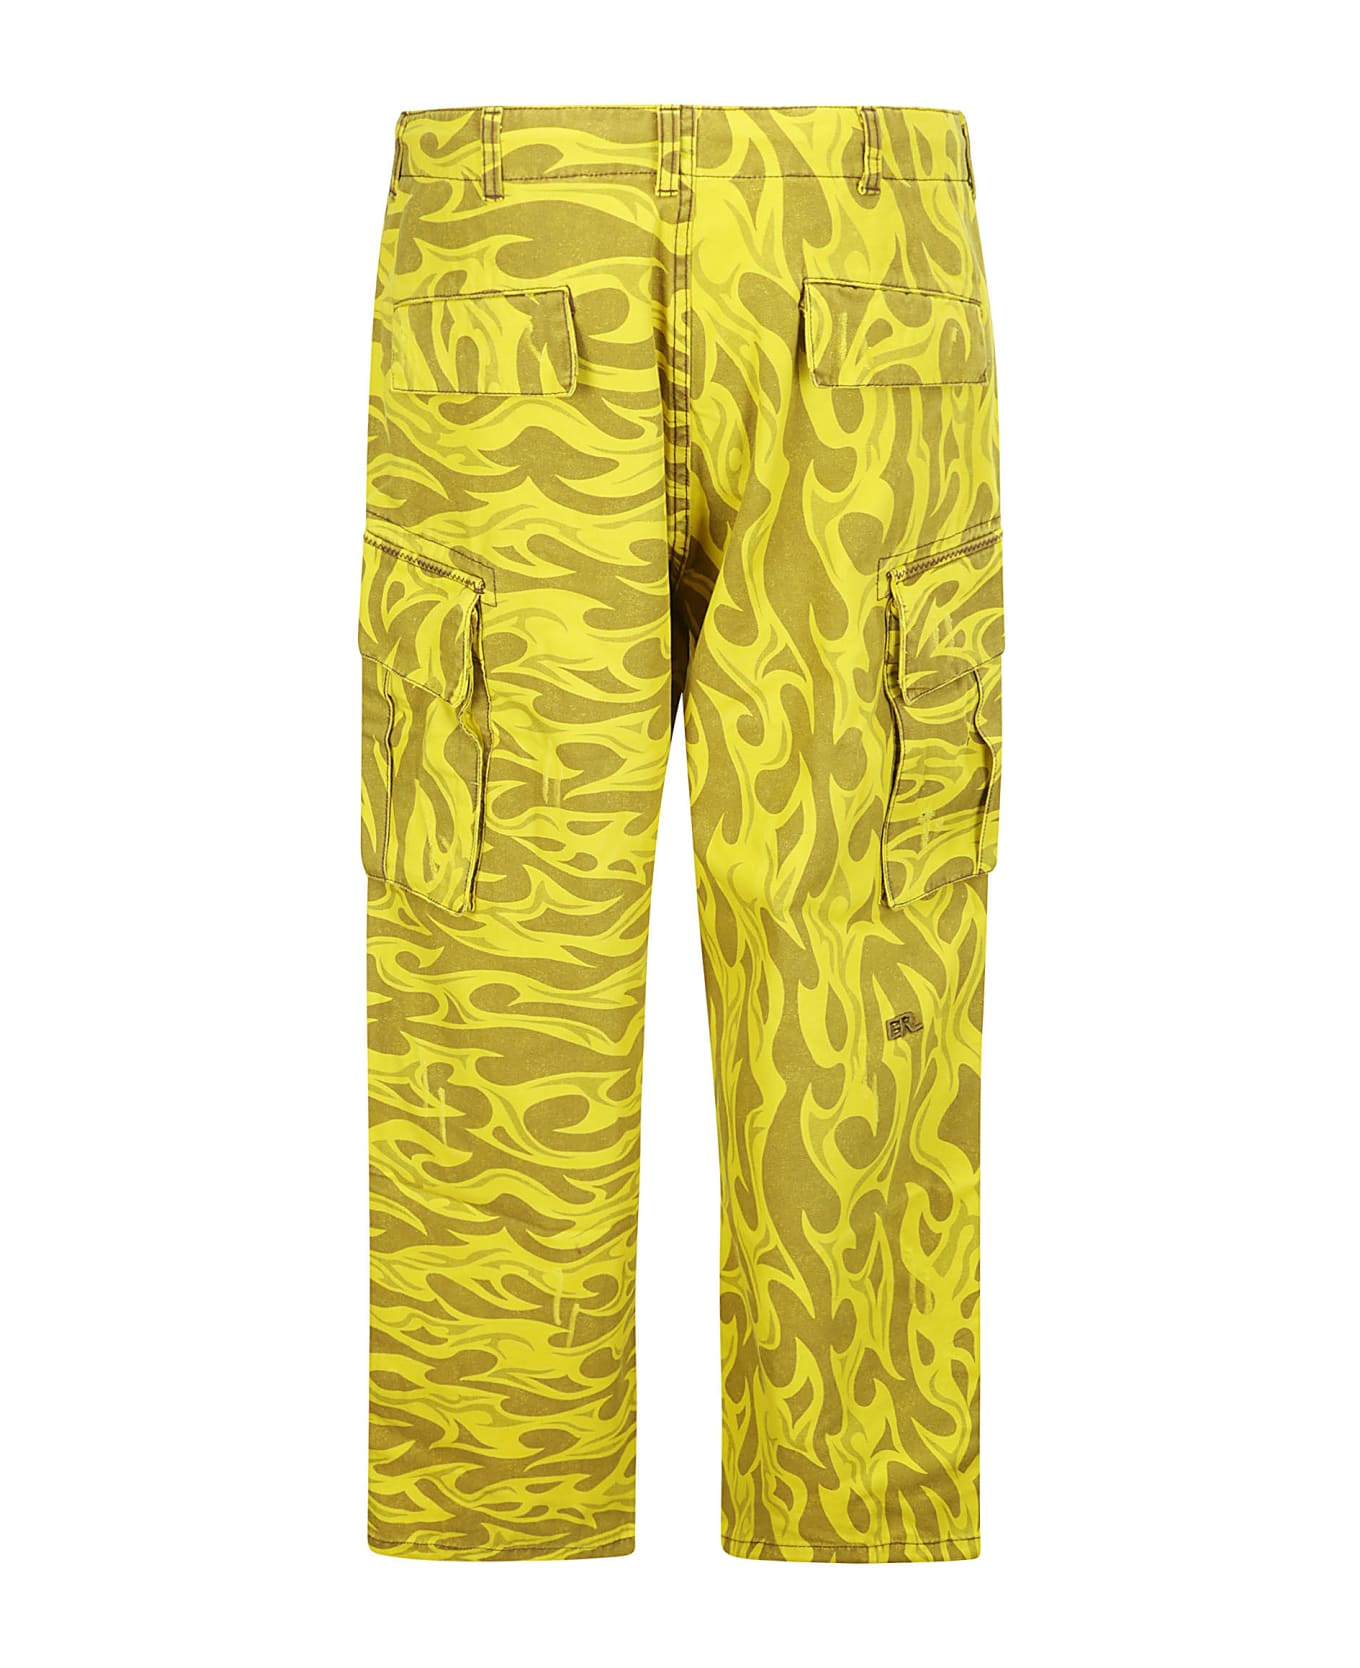 ERL Unisex Printed Cargo Pants Woven - YELLOW FLAME ボトムス